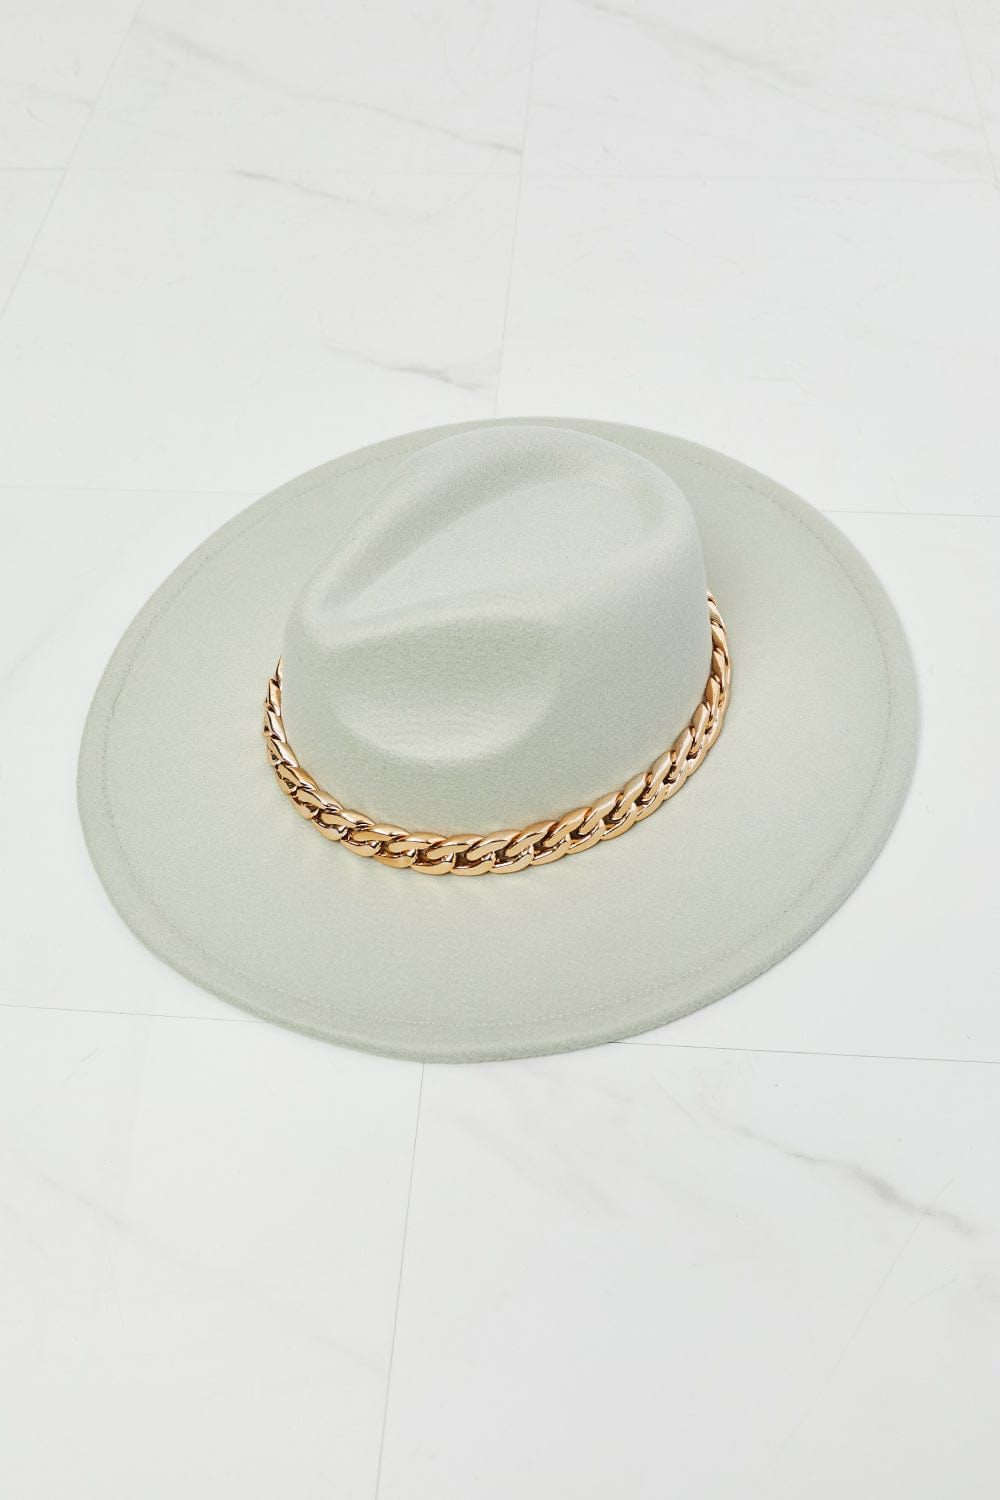 Keep Your Promise Fedora Hat in Mint - Body By J'ne